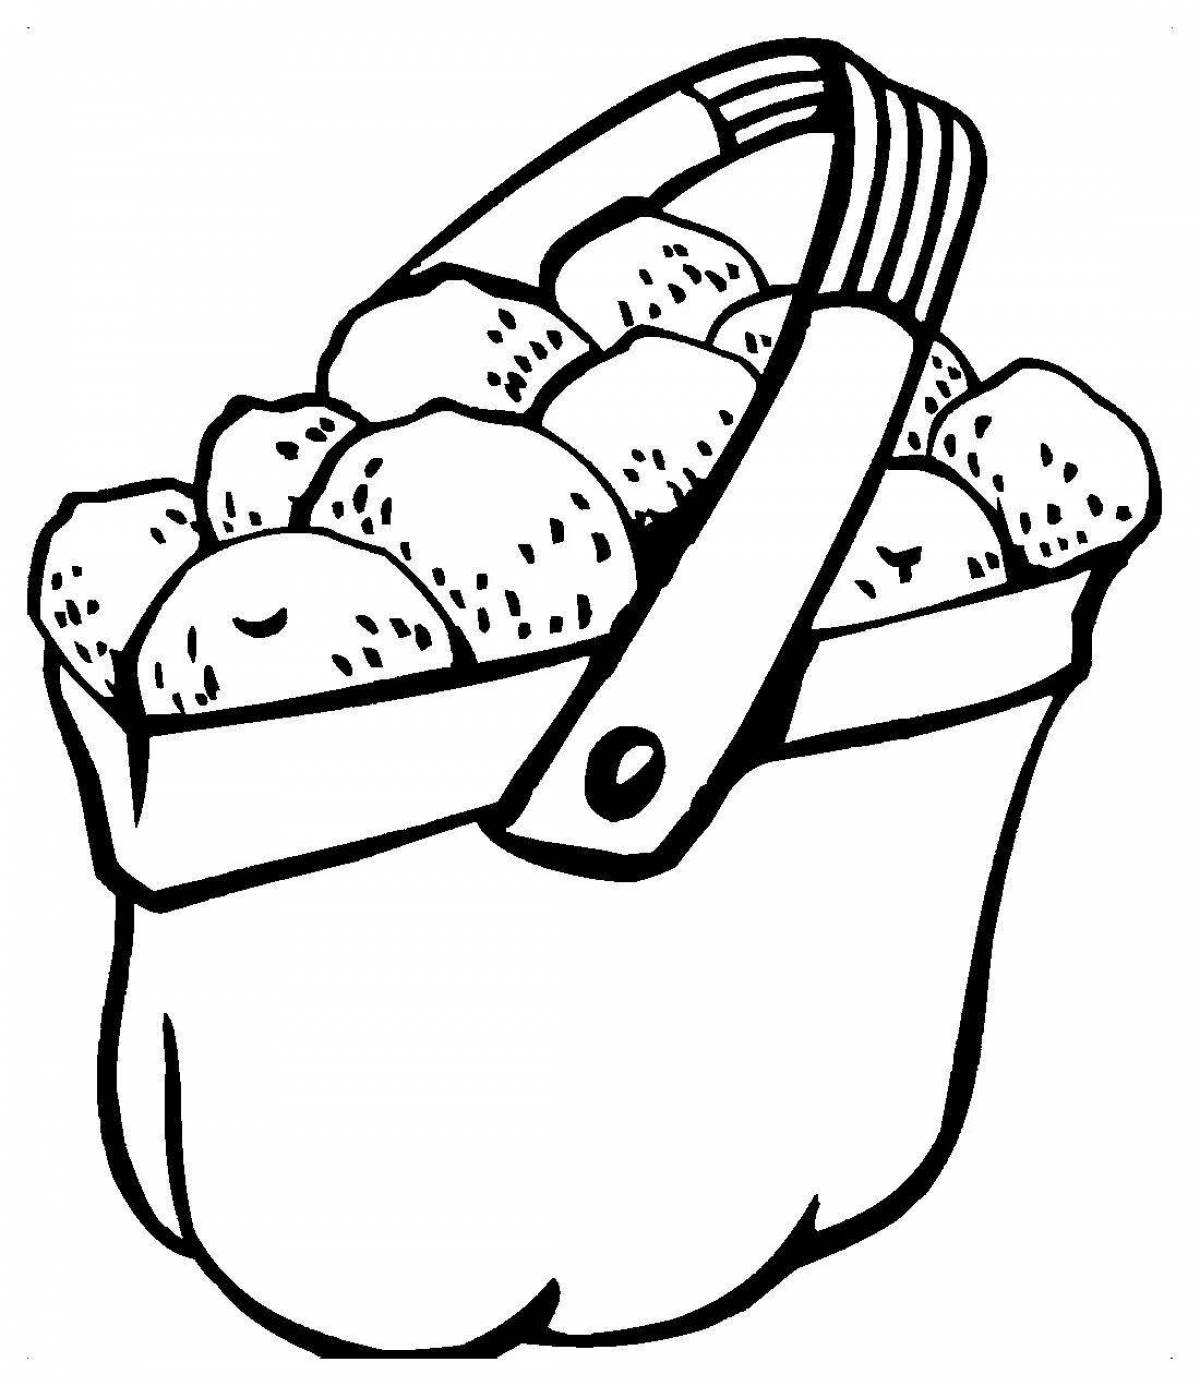 Amazing grocery cart coloring page